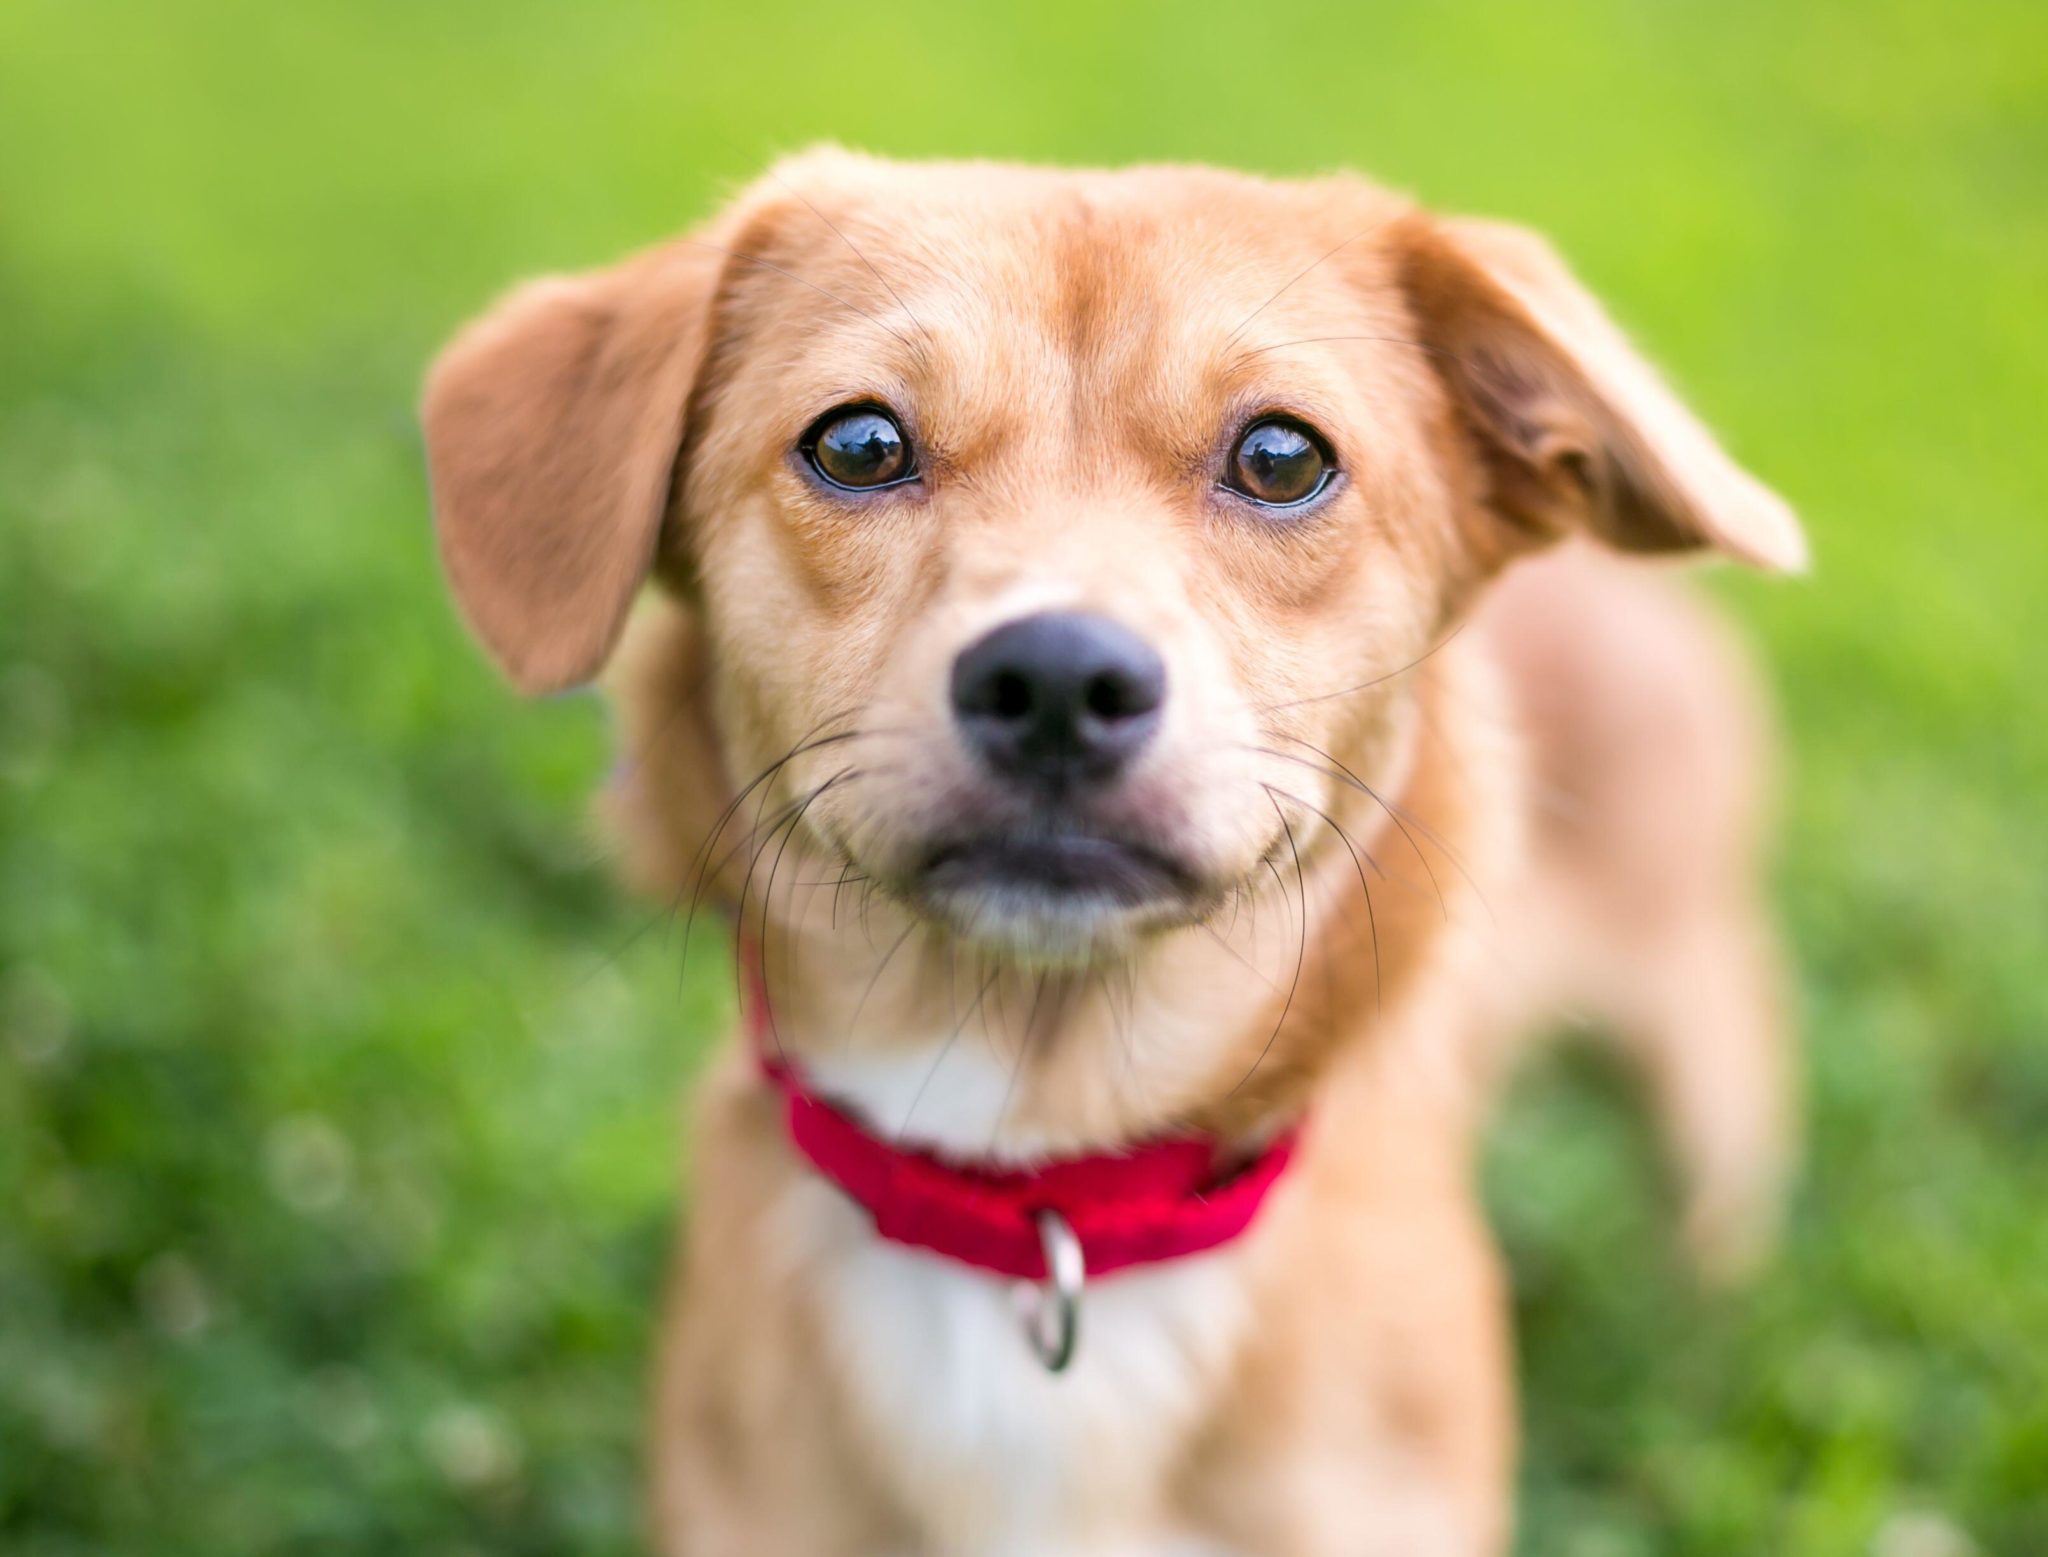 A brown mixed-breed dog with floppy ears wearing a red collar.